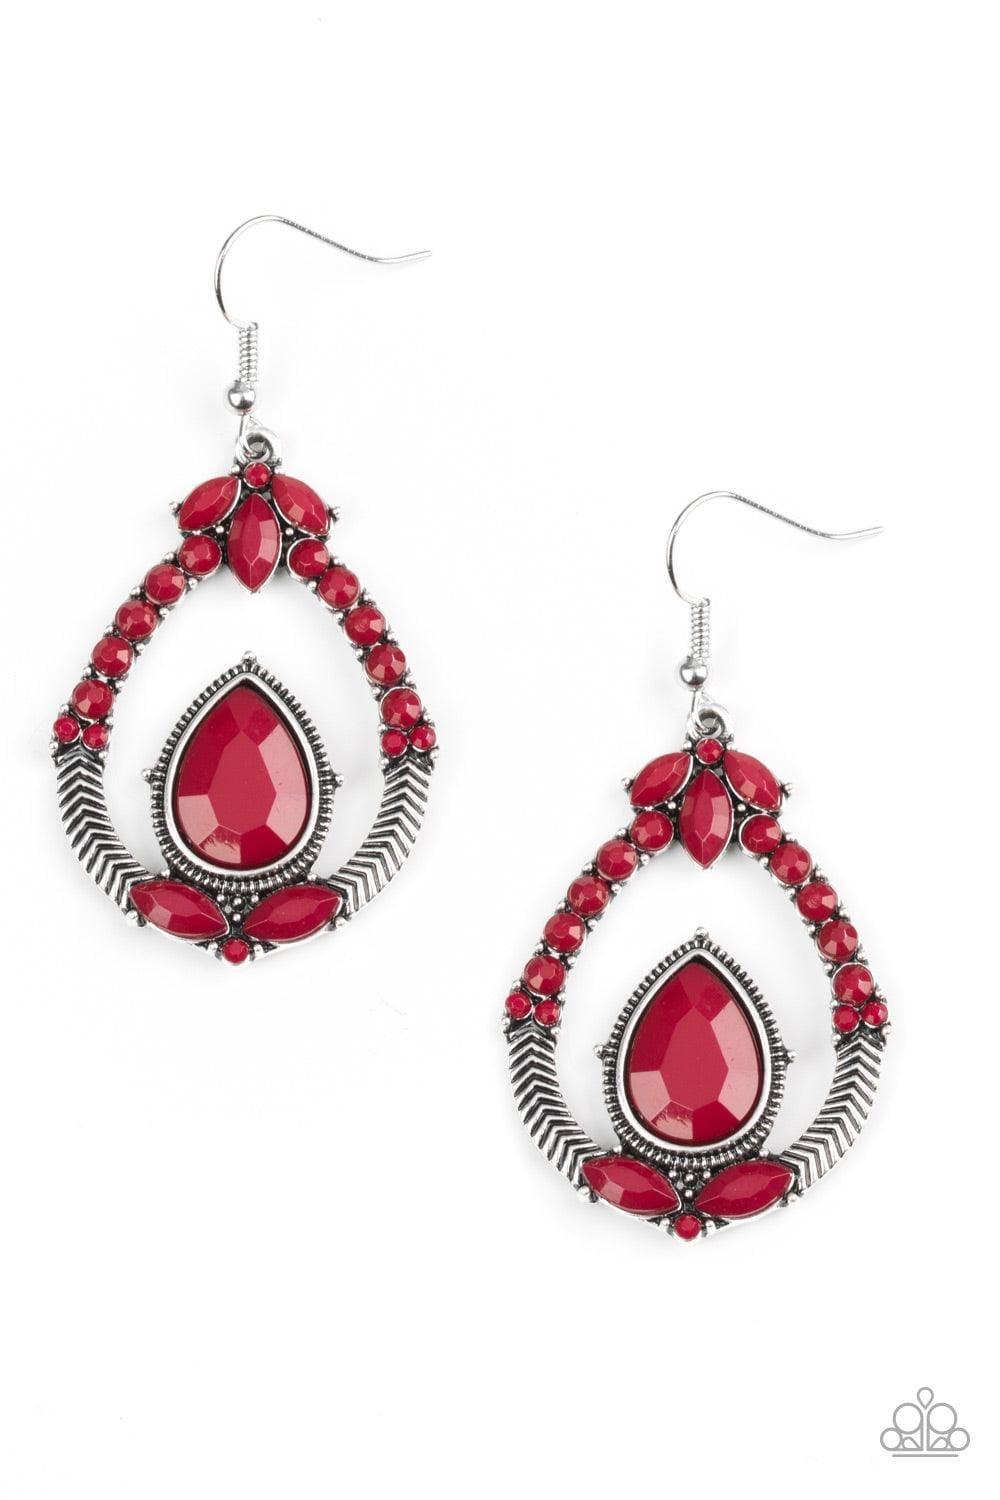 Paparazzi Accessories - Vogue Voyager - Red Earrings - Bling by JessieK